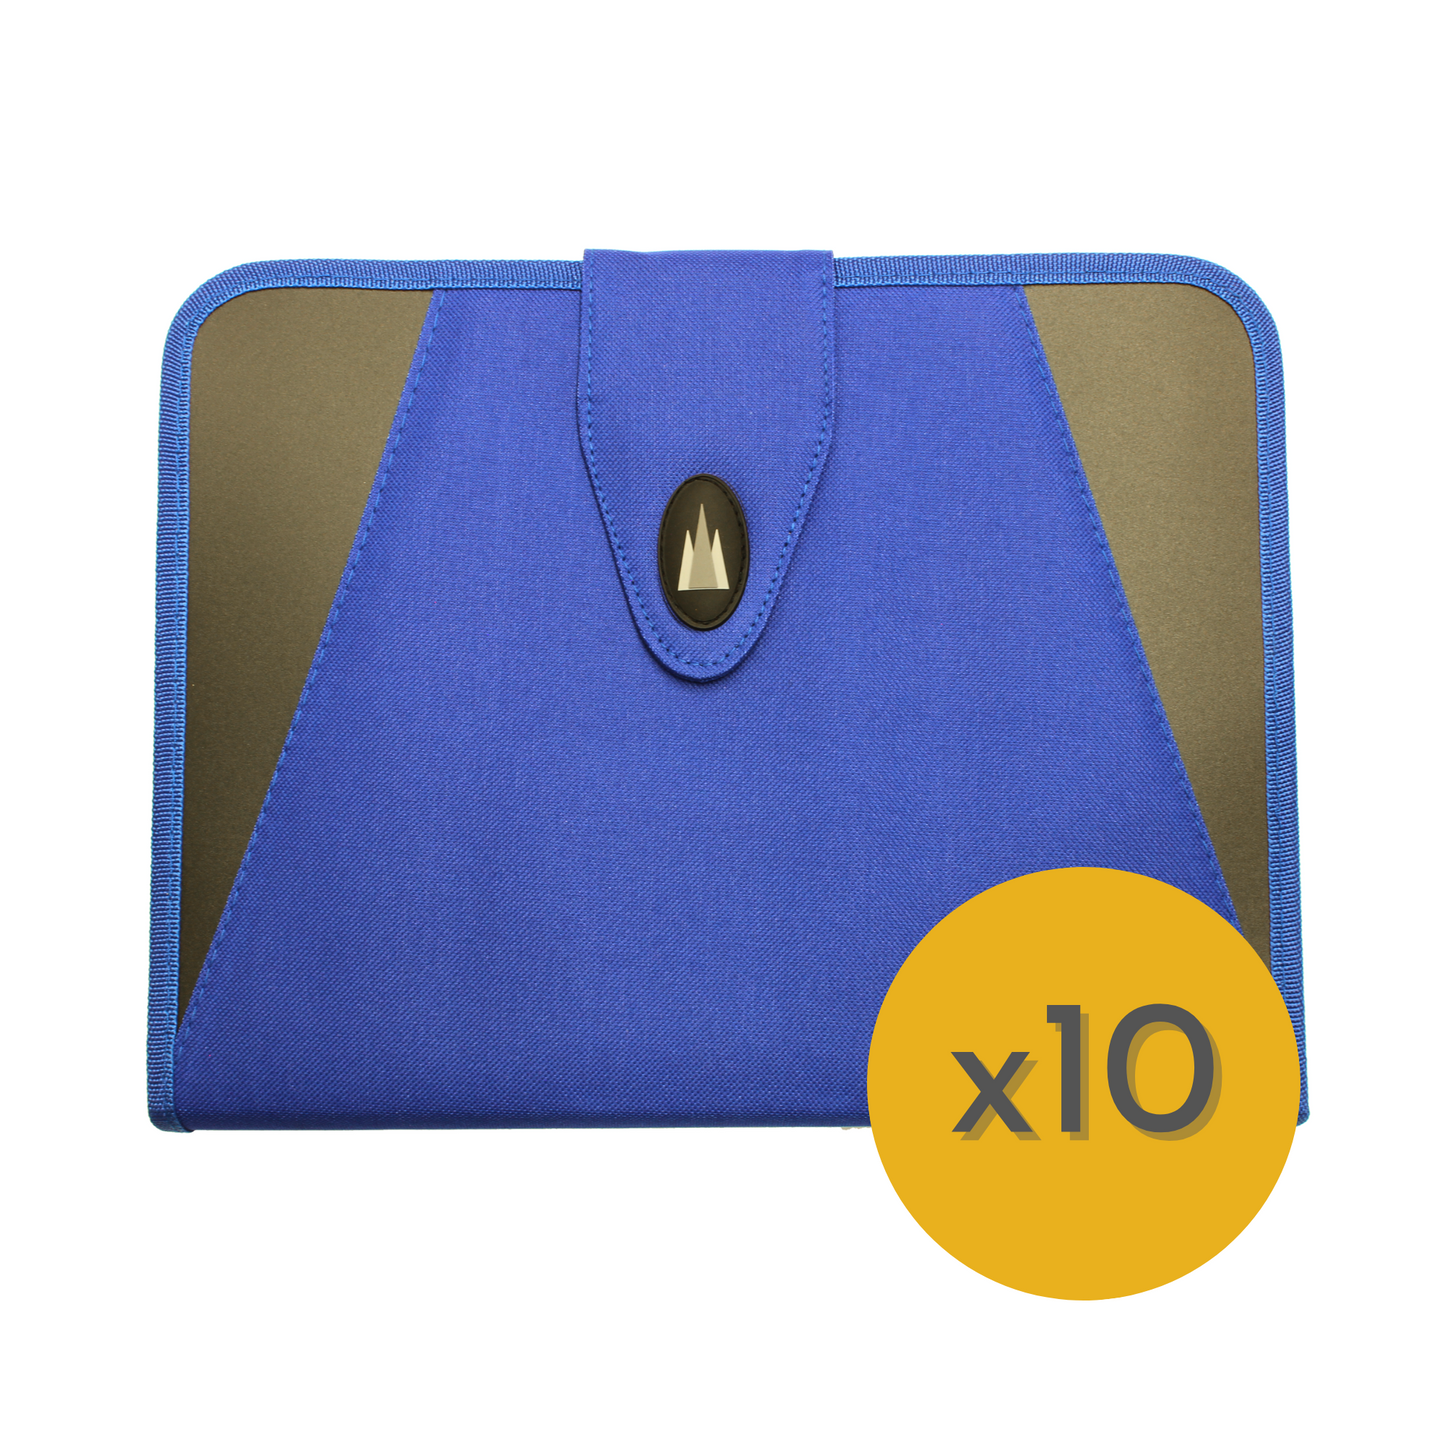 A blue fabric expanding document folder with a velcro flap fastening and sturdy blue binding. In the bottom right corner, a bold yellow circle with the text 'x10' indicates the featured bundle offer. The folder has a clean, professional look with a Cathedral Products logo on the velcro fastener.